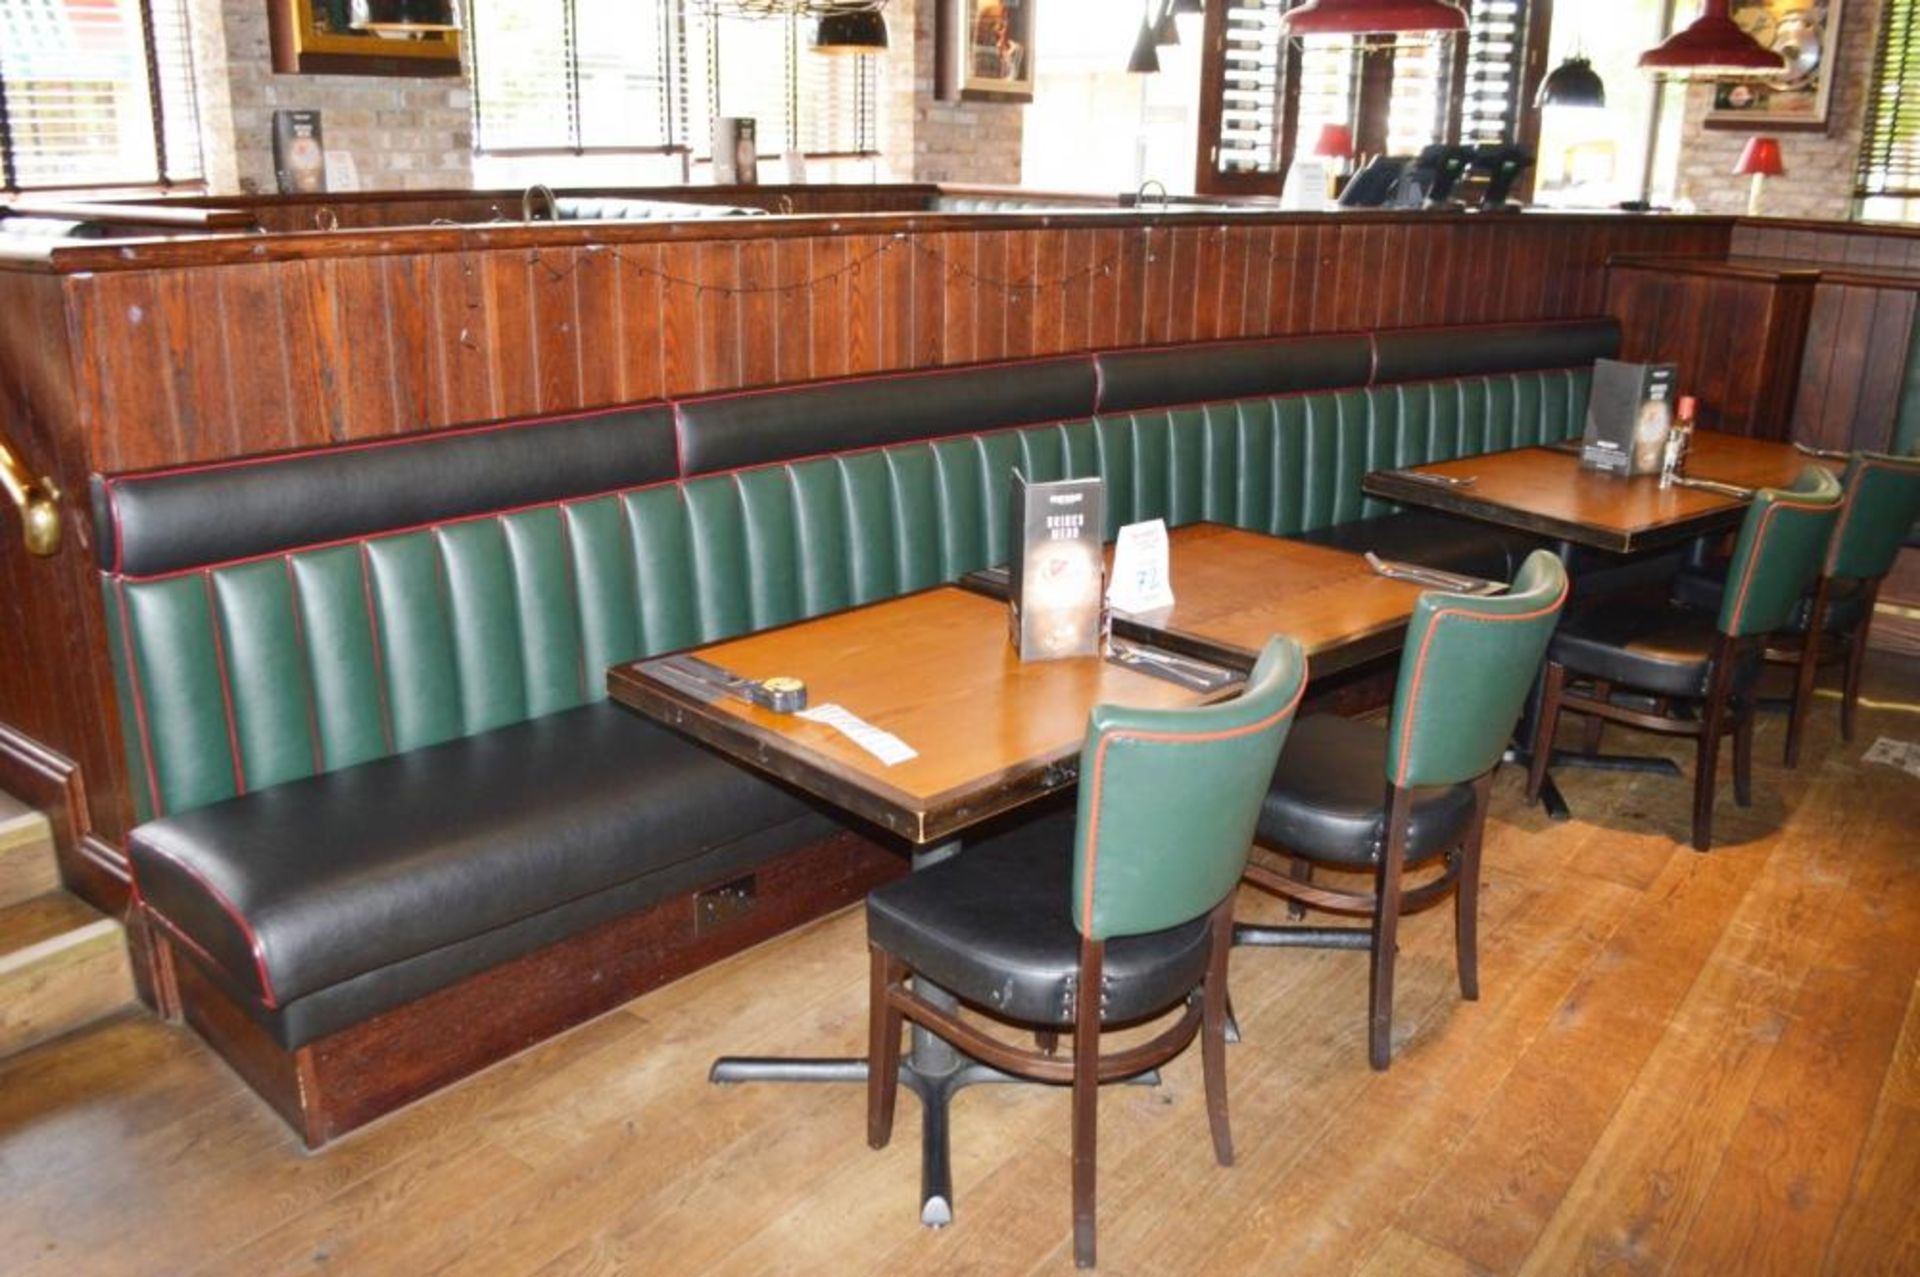 1 x Long Banquet Seating Bench - Features a Leather Upholstery With Green Backrests, Black Seat